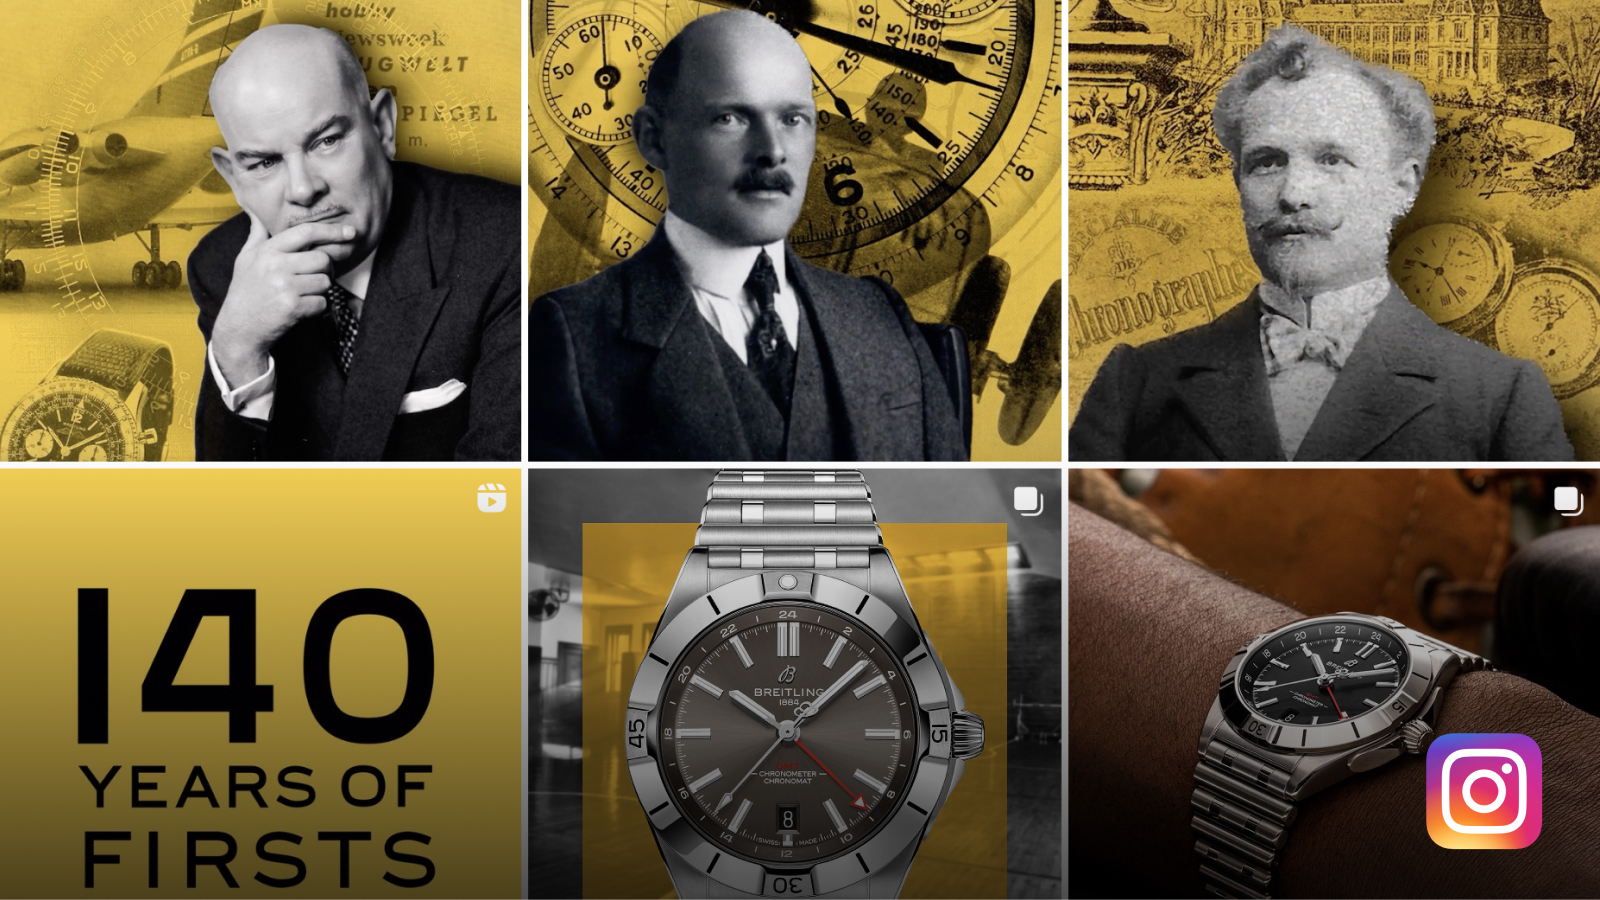 Explore our latest launches on Instagram to stay up-to-date with Breitling&#039;s innovations.